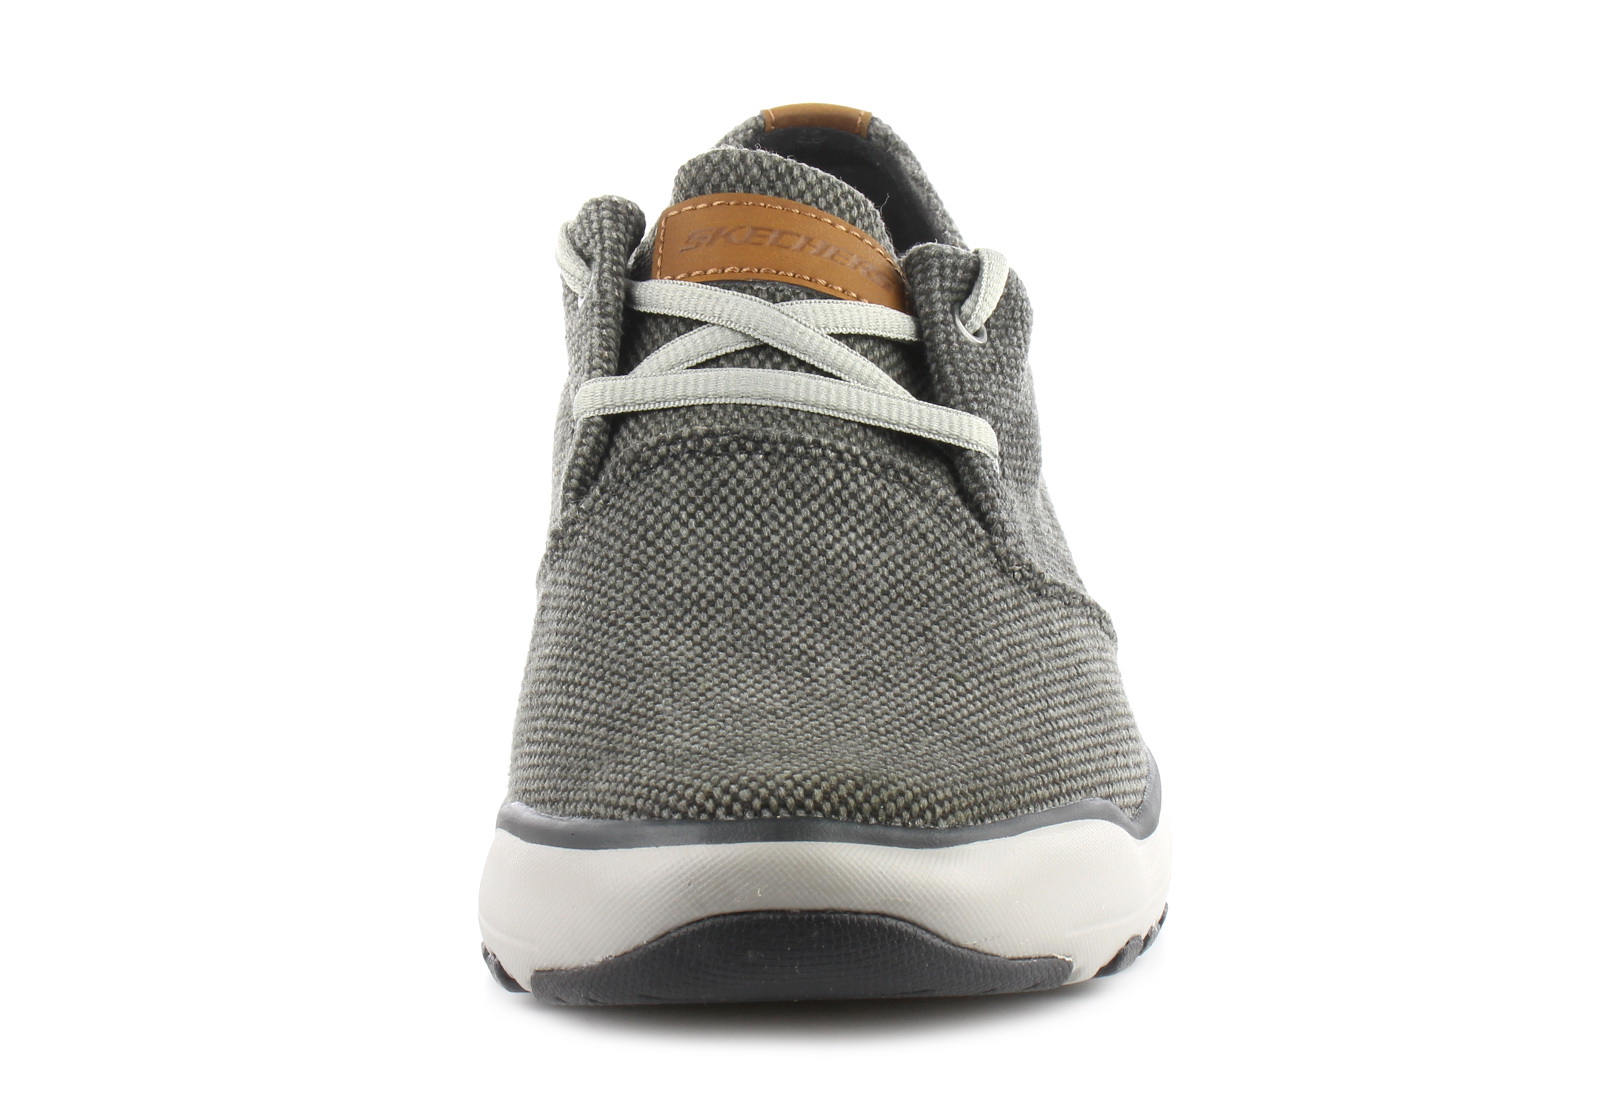 embudo Acera Proverbio Skechers Shoes - Oldis - Stound - 64622-bkgy - Online shop for sneakers,  shoes and boots